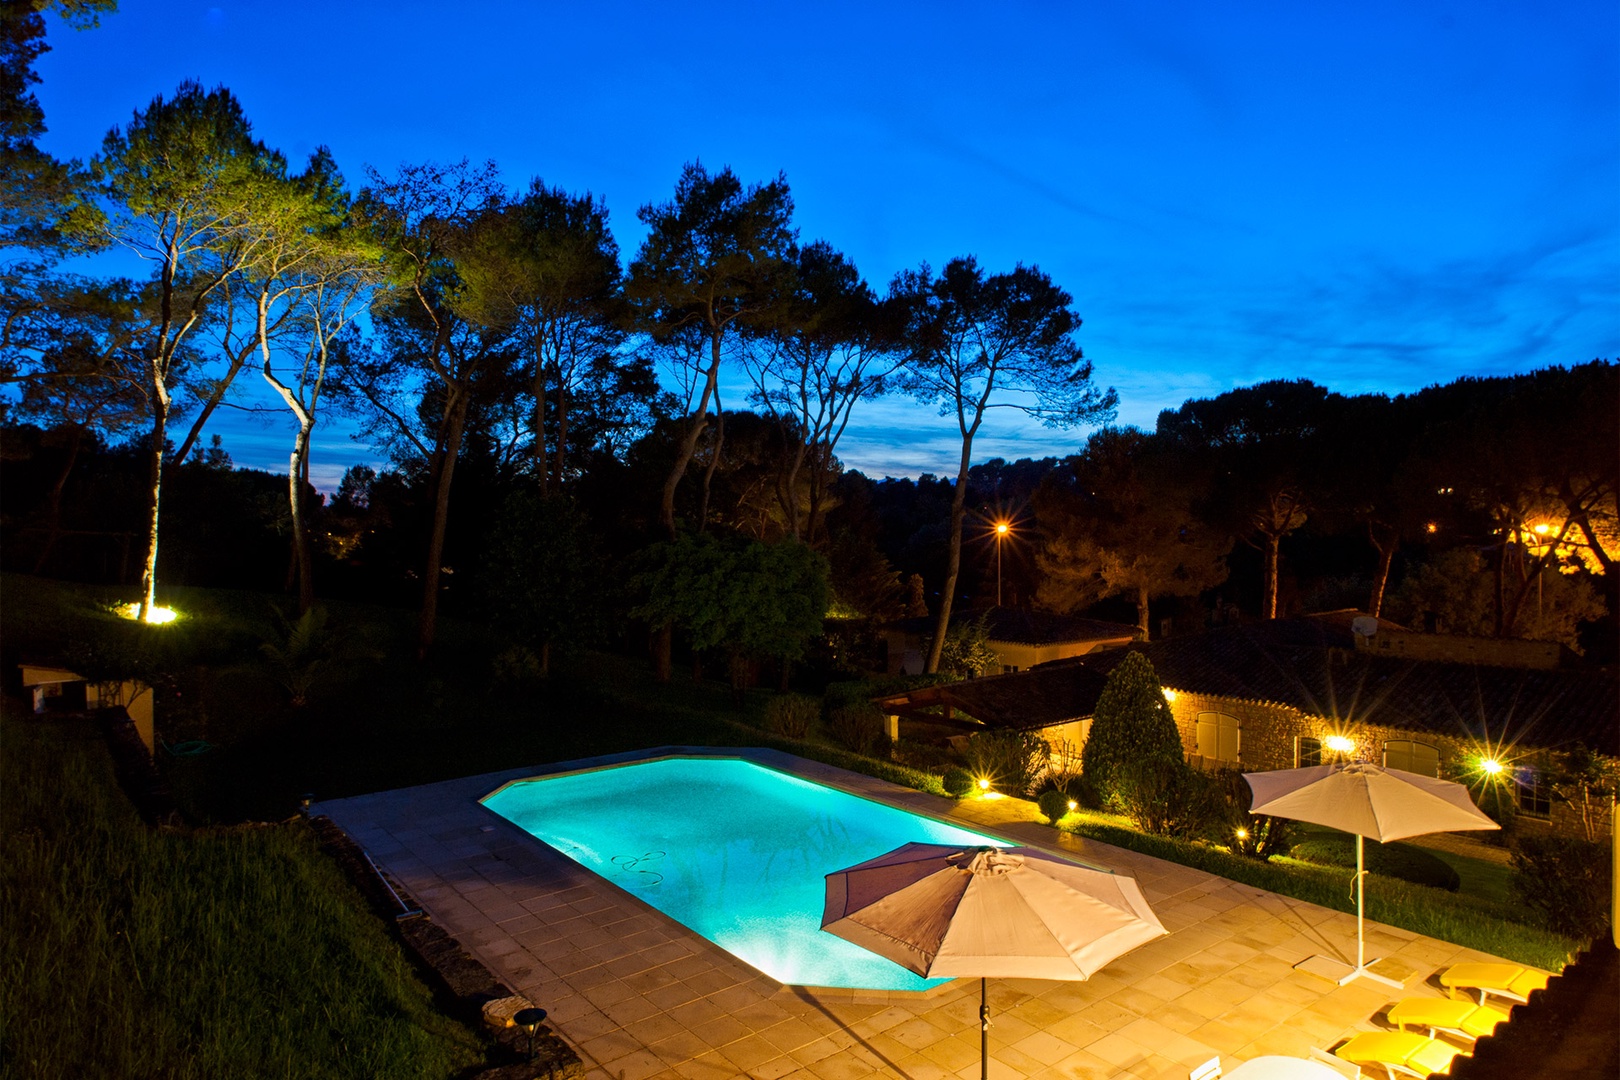 View of the pool at night from the house